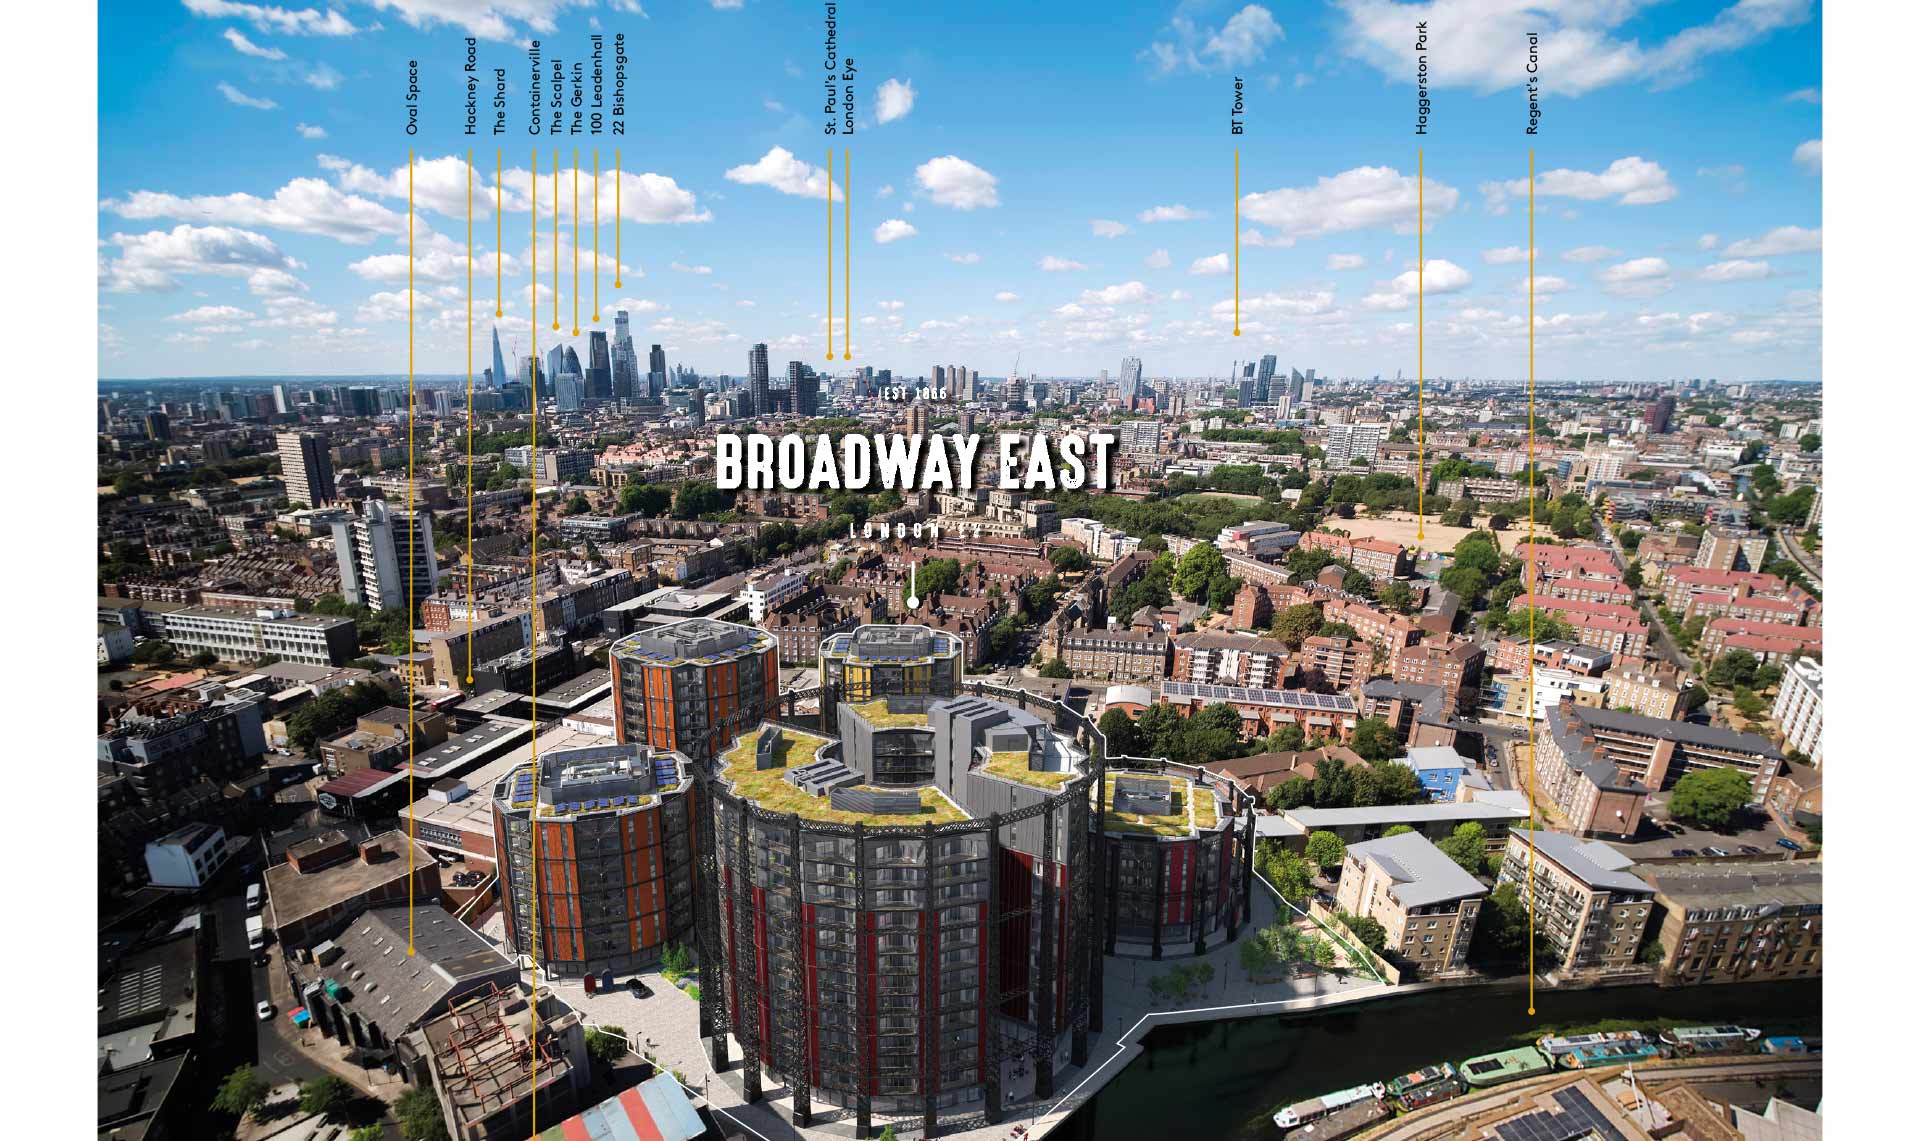 Broadway East Site Plan with Location Labels